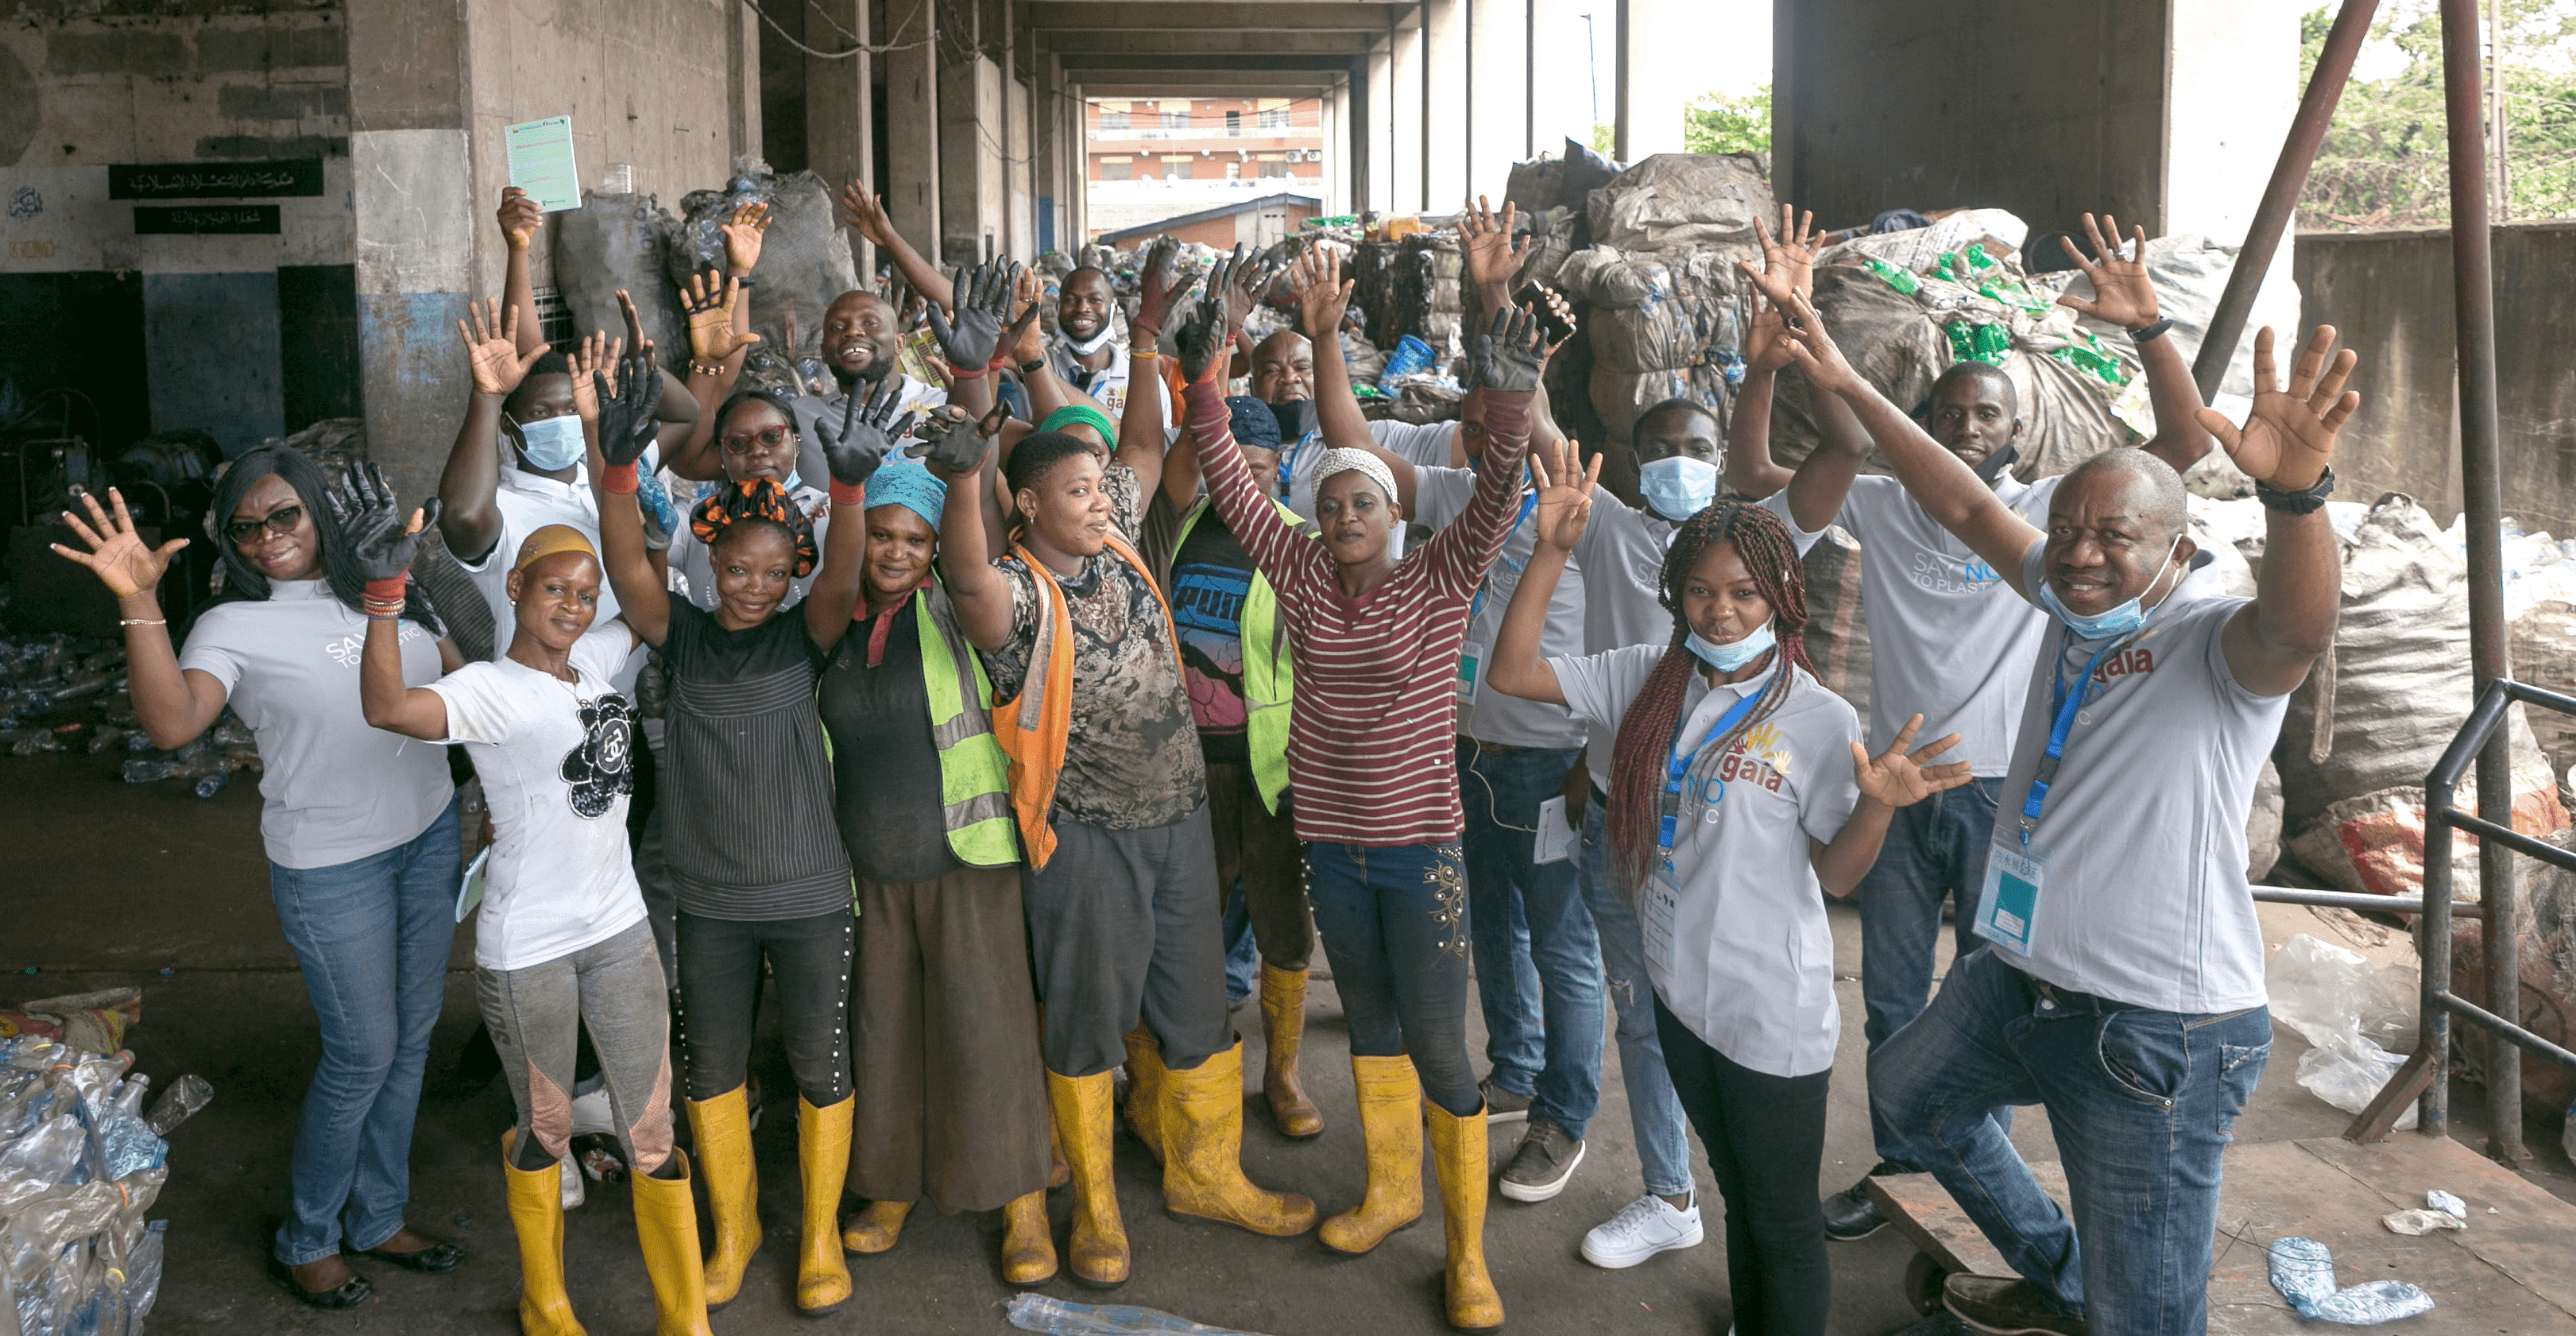 Group of black men and women smiling at camera and raising their arms up in the air. Some of them are wearing yellow rubber boots.